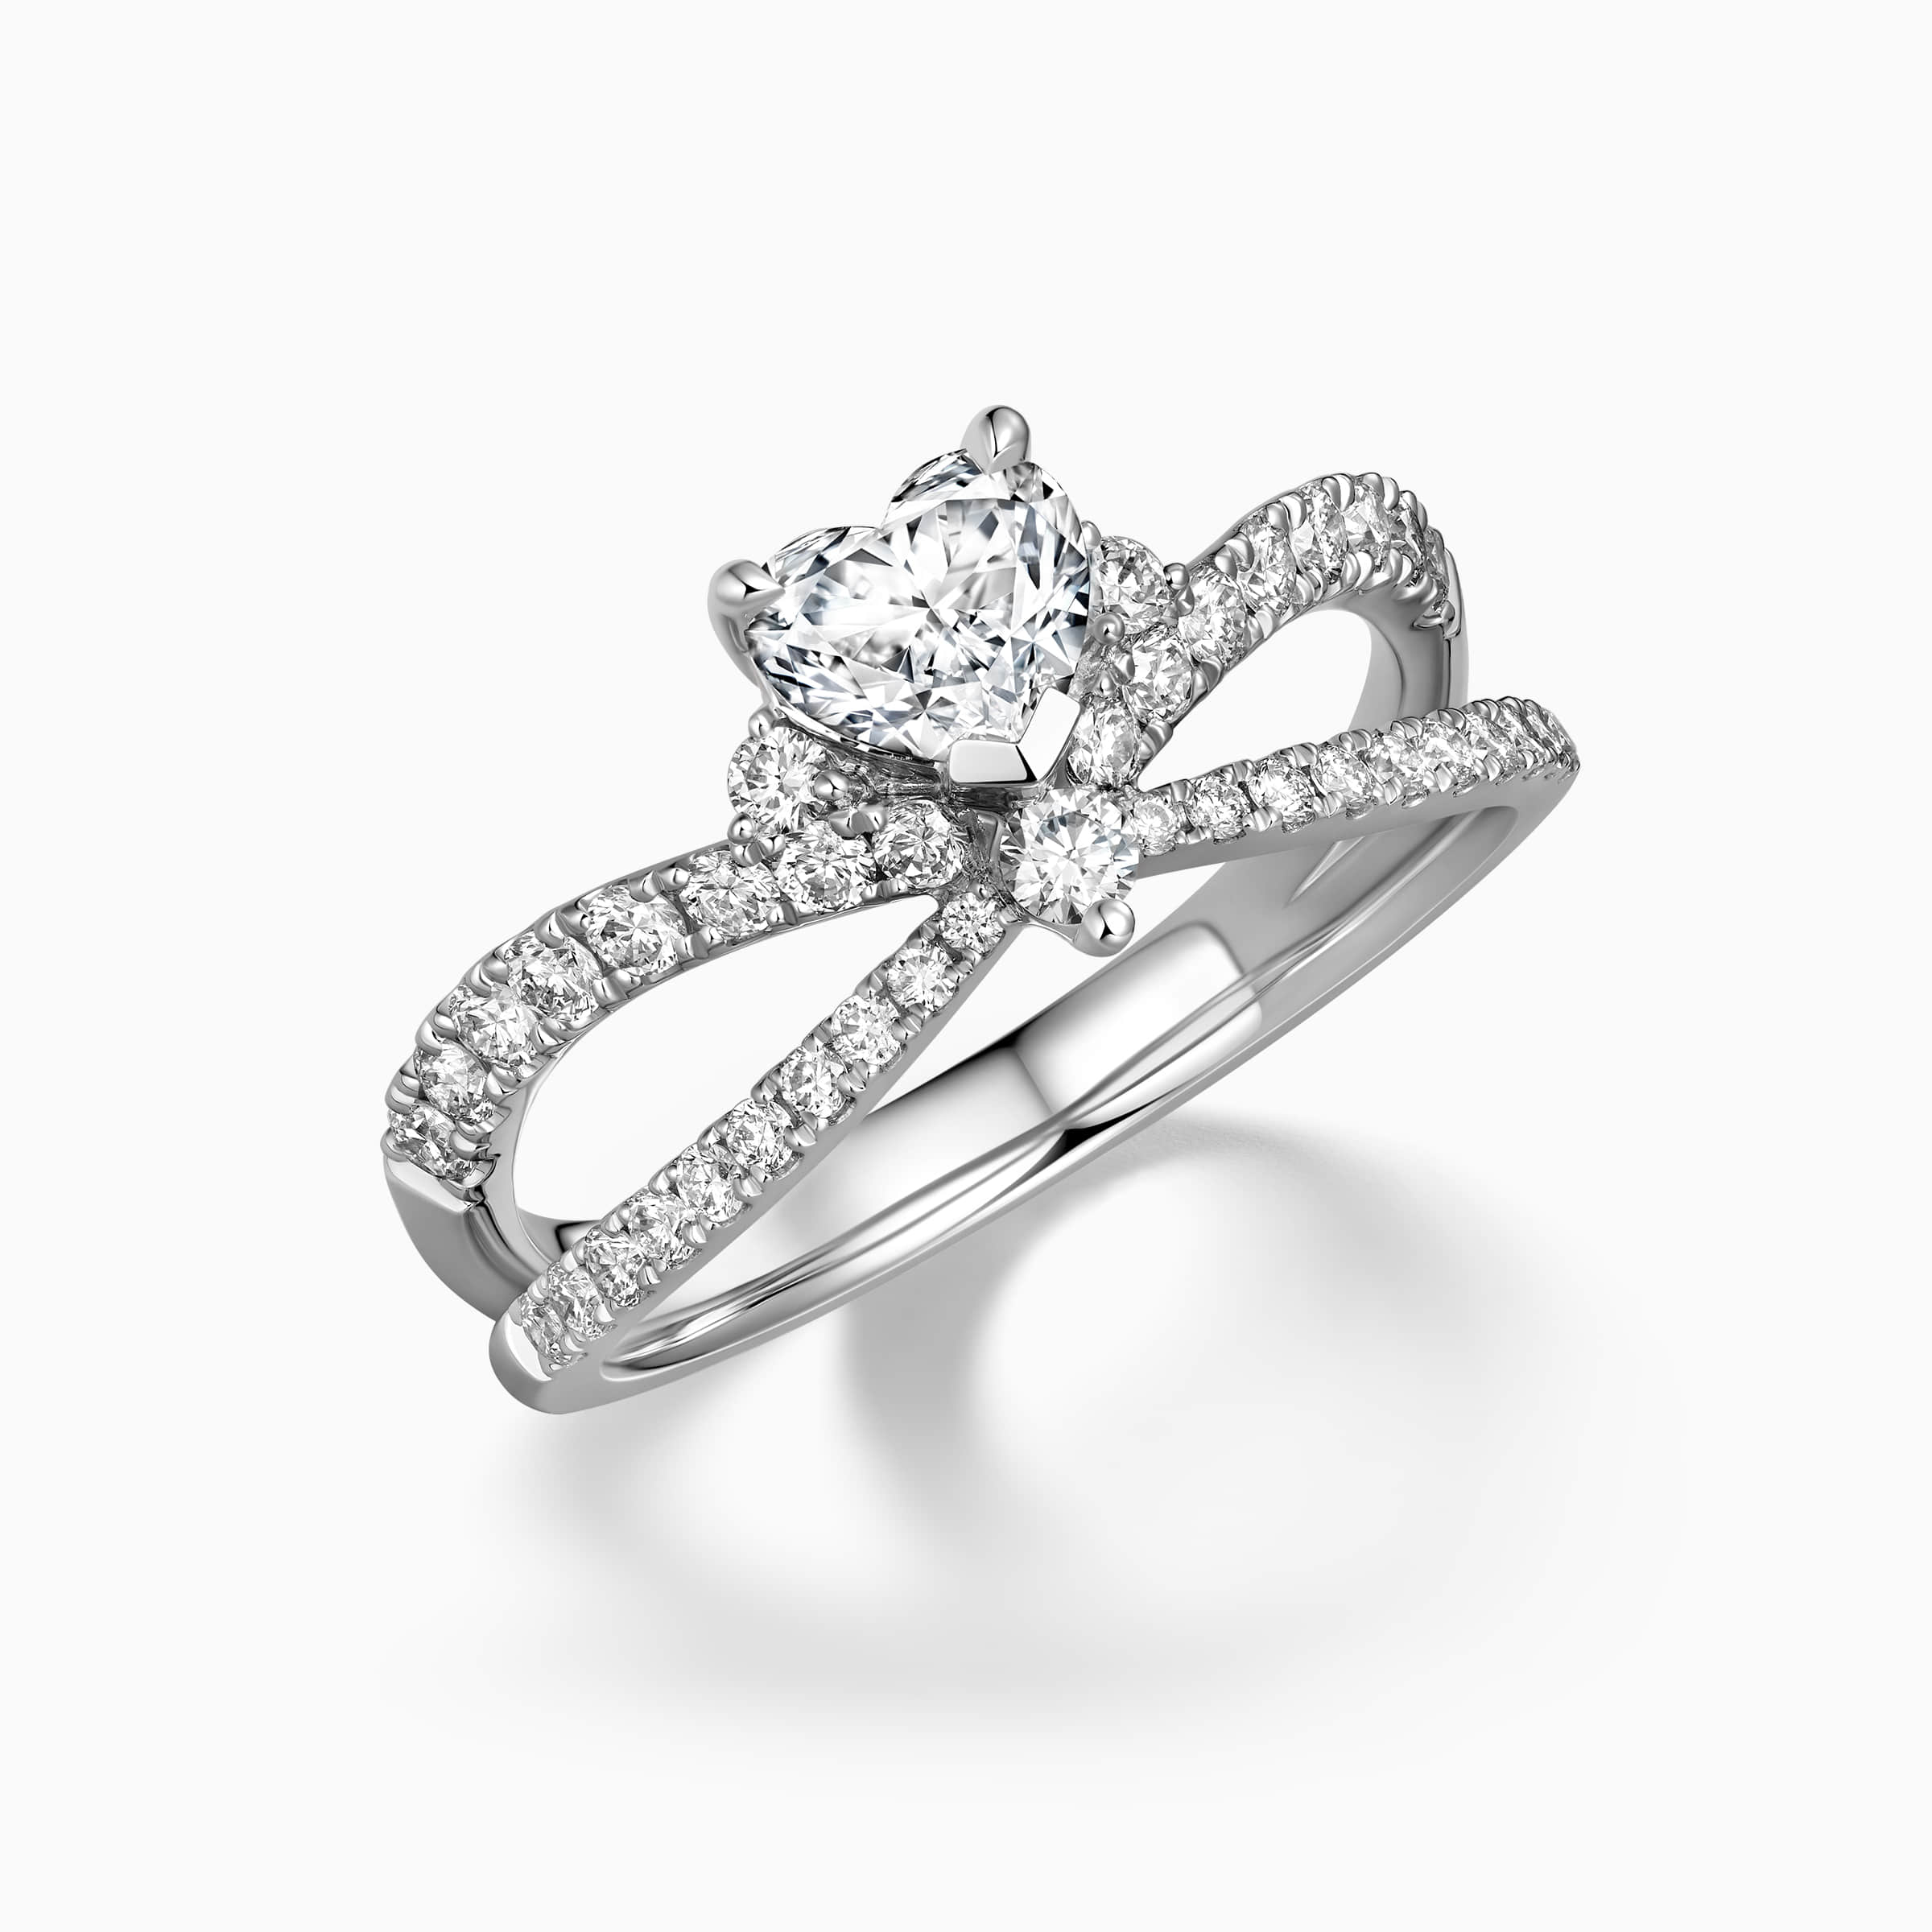 darry ring heart diamond engagement ring angle view